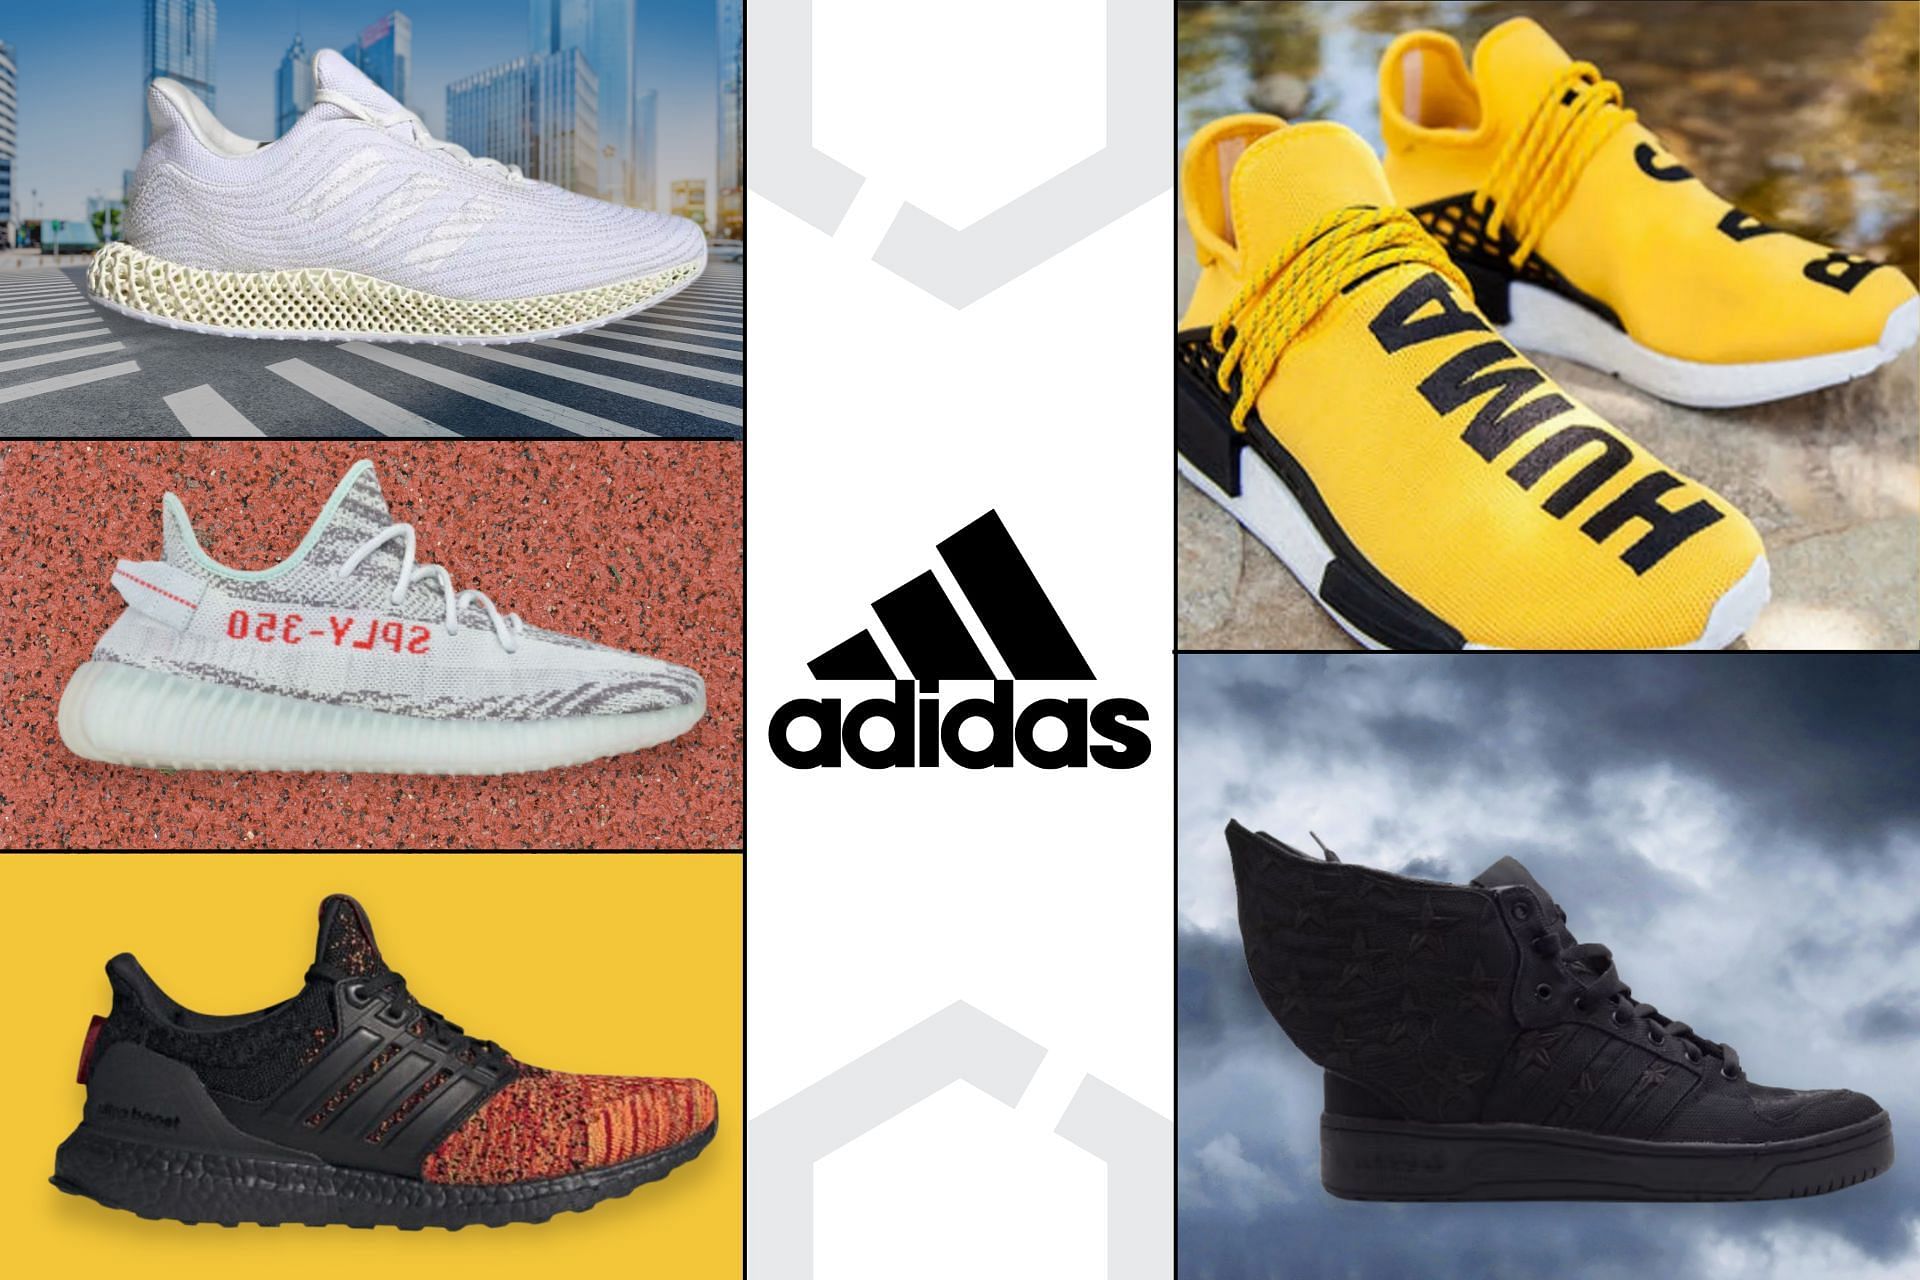 The five Adidas collabs of all time that changed the sneaker game (Image via sportskeeda)